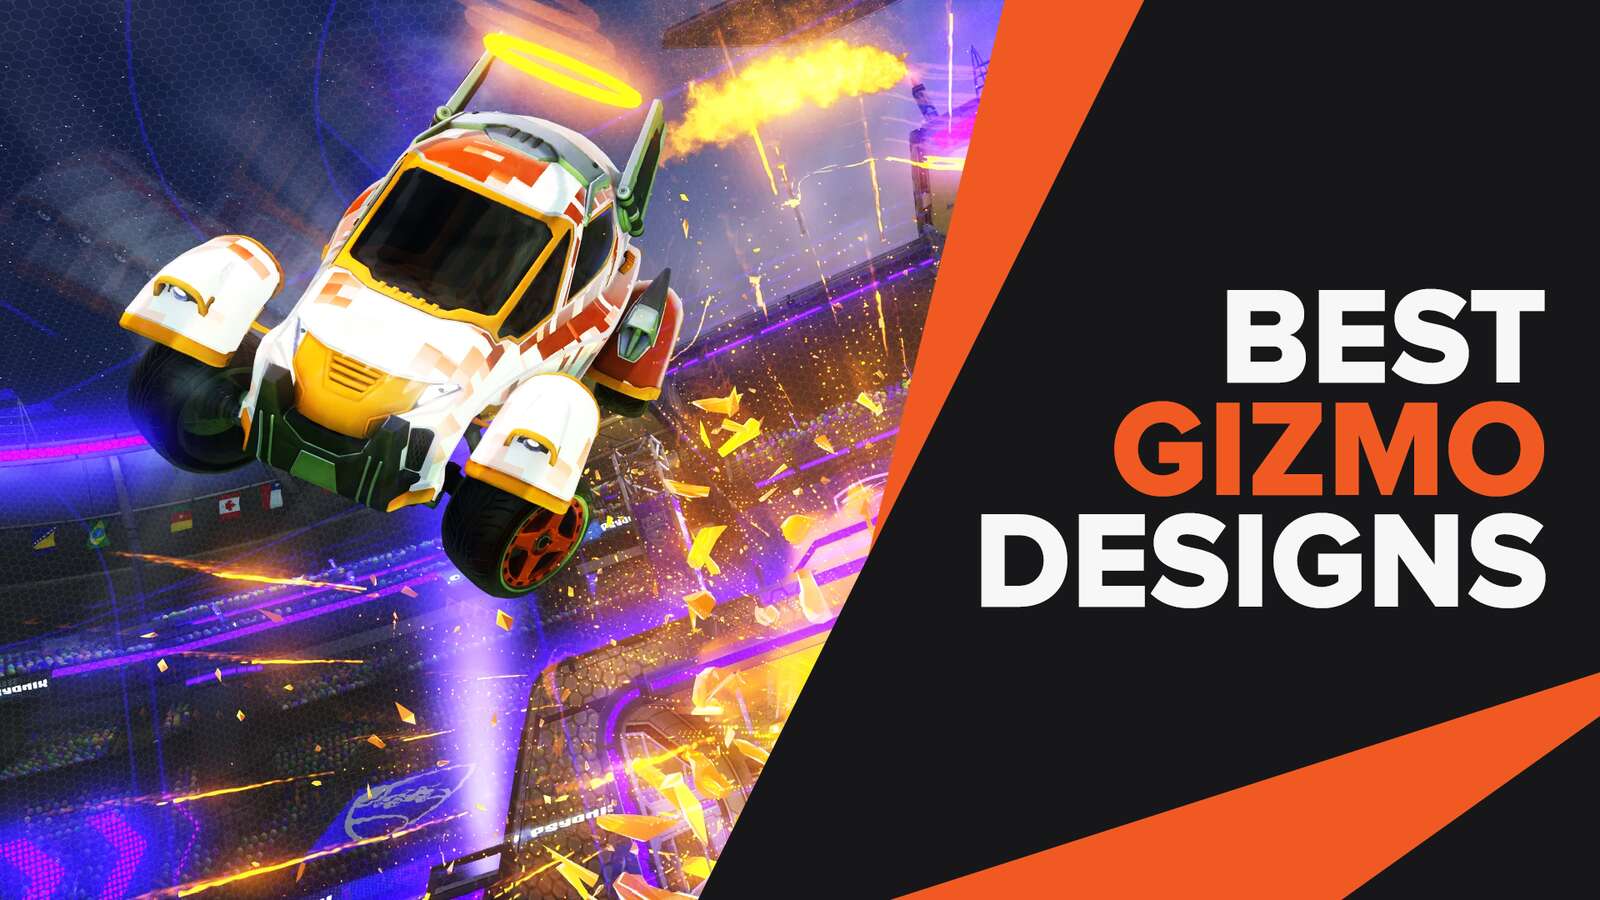 The Best Gizmo Designs You will love in Rocket League